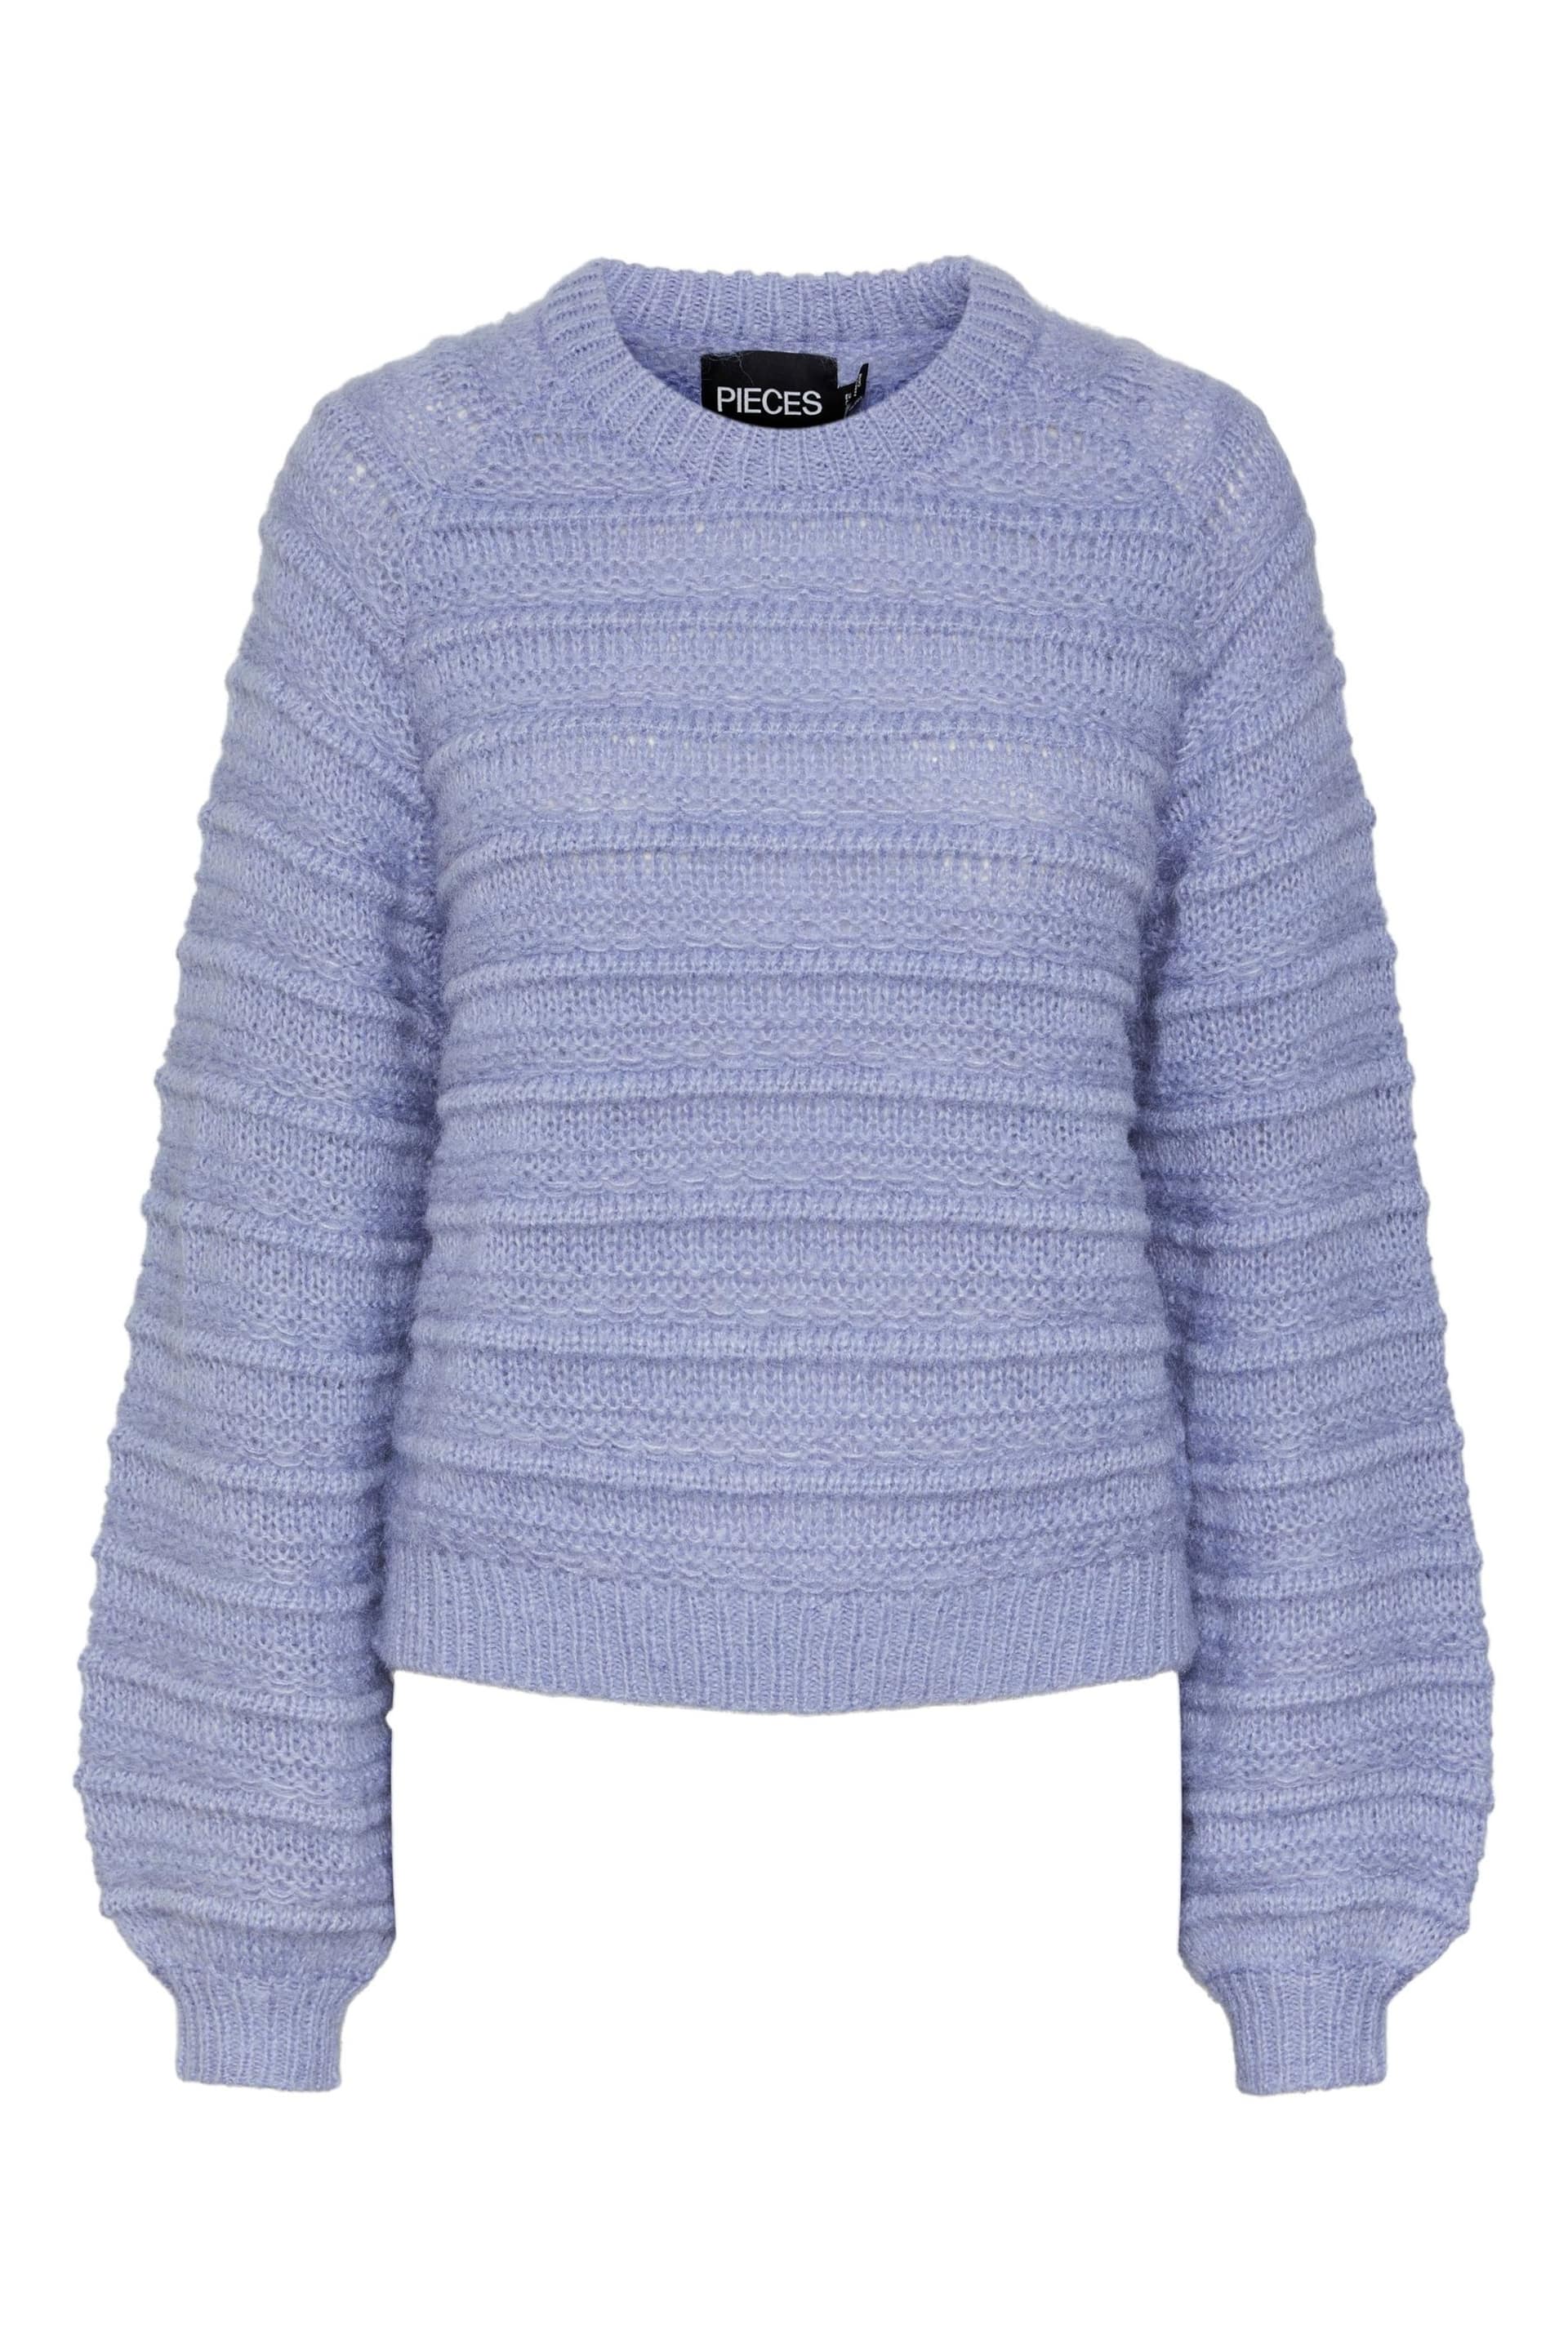 PIECES Blue Cosy Long Sleeve Jumper - Image 5 of 5